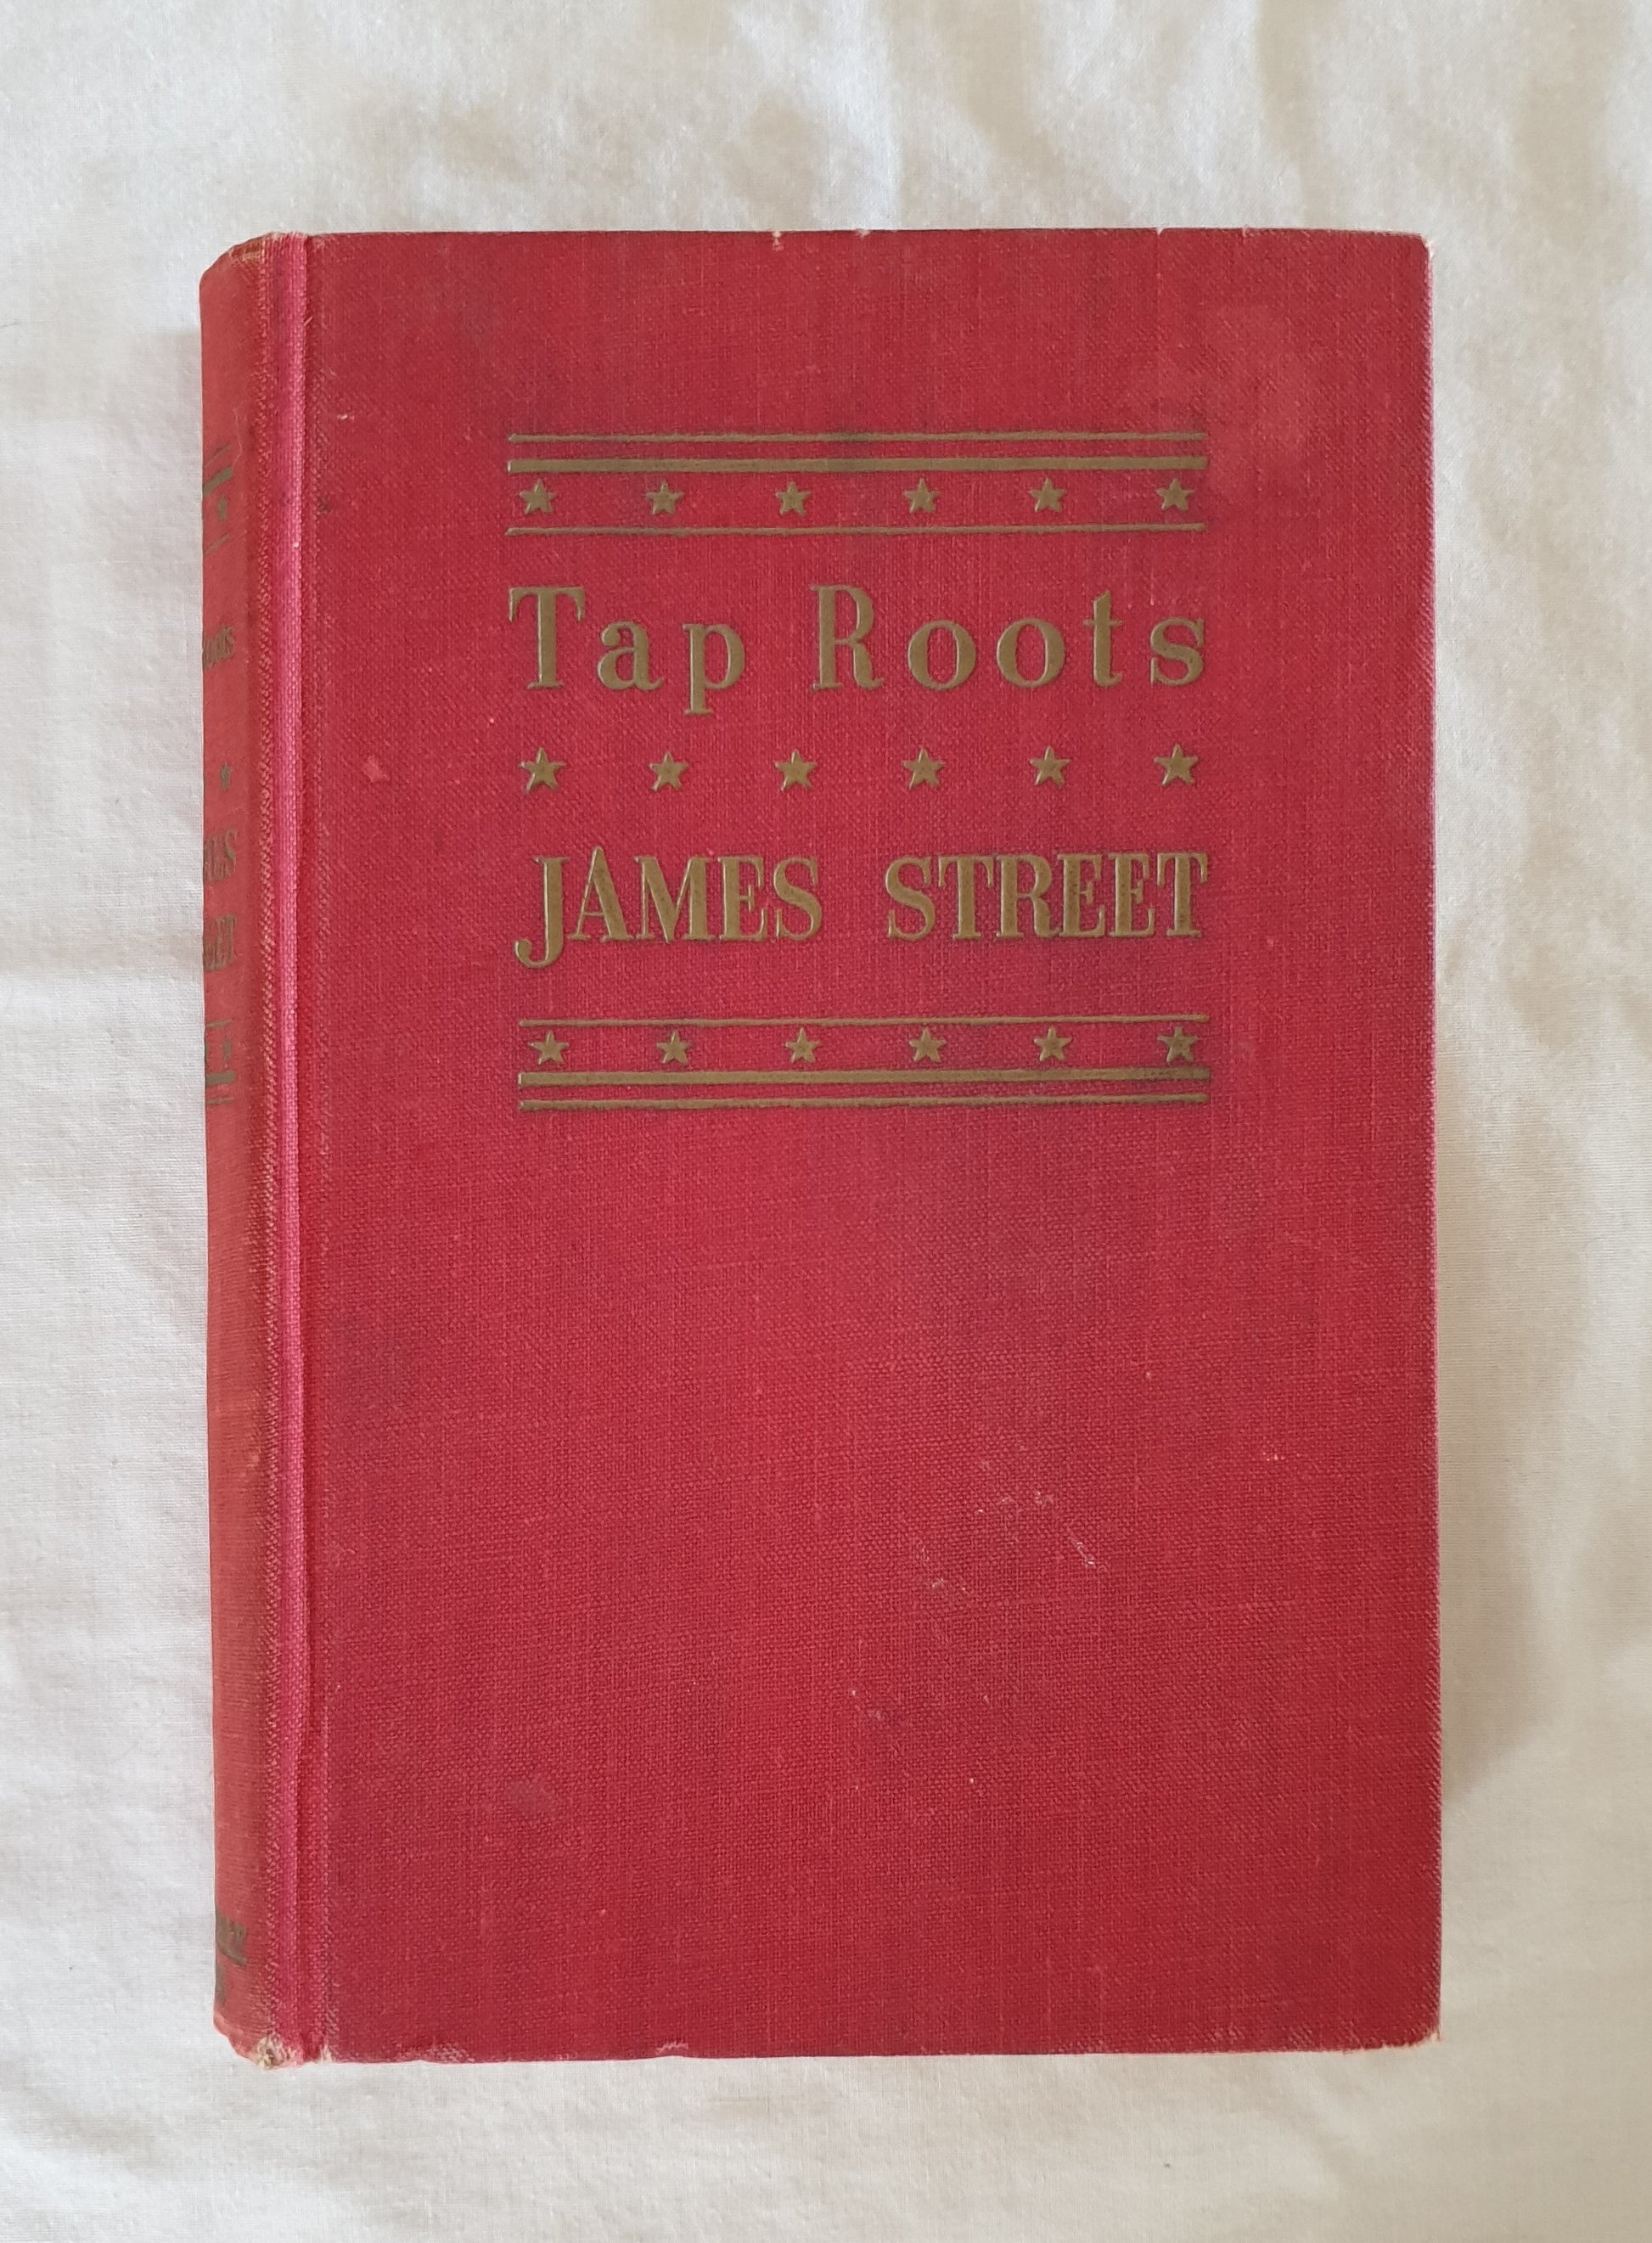 Tap Roots  by James Street